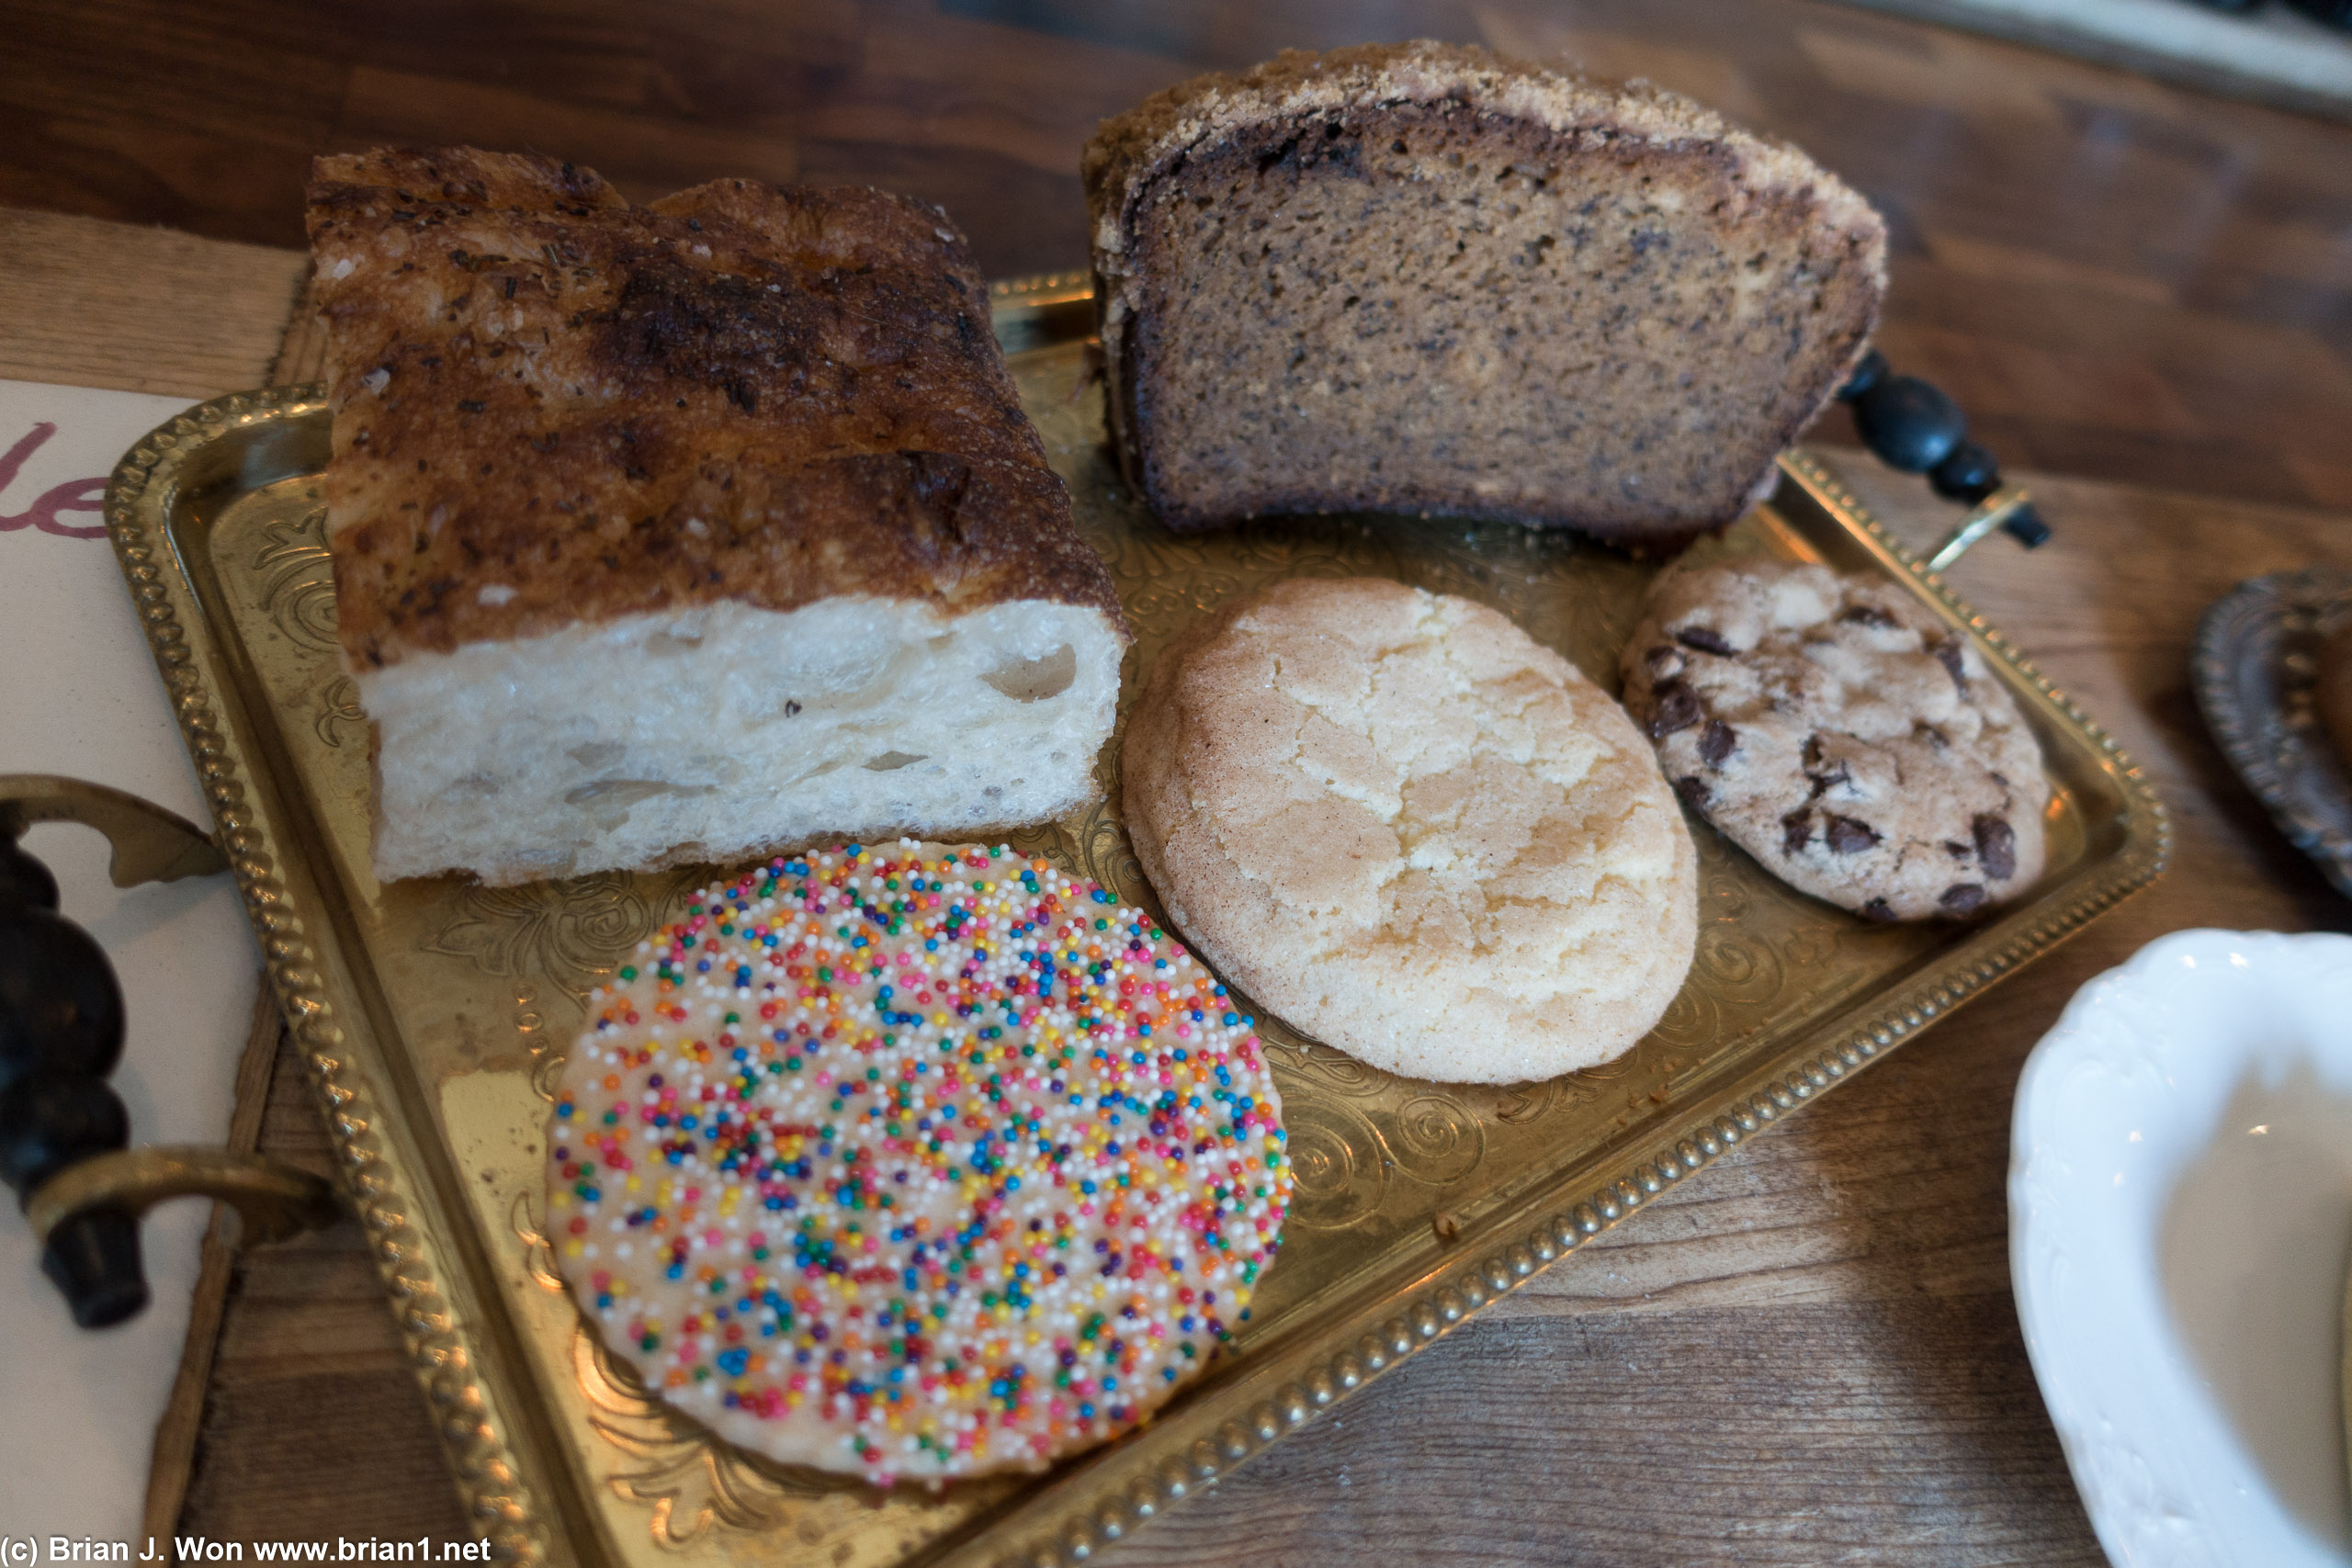 Breads and desserts.